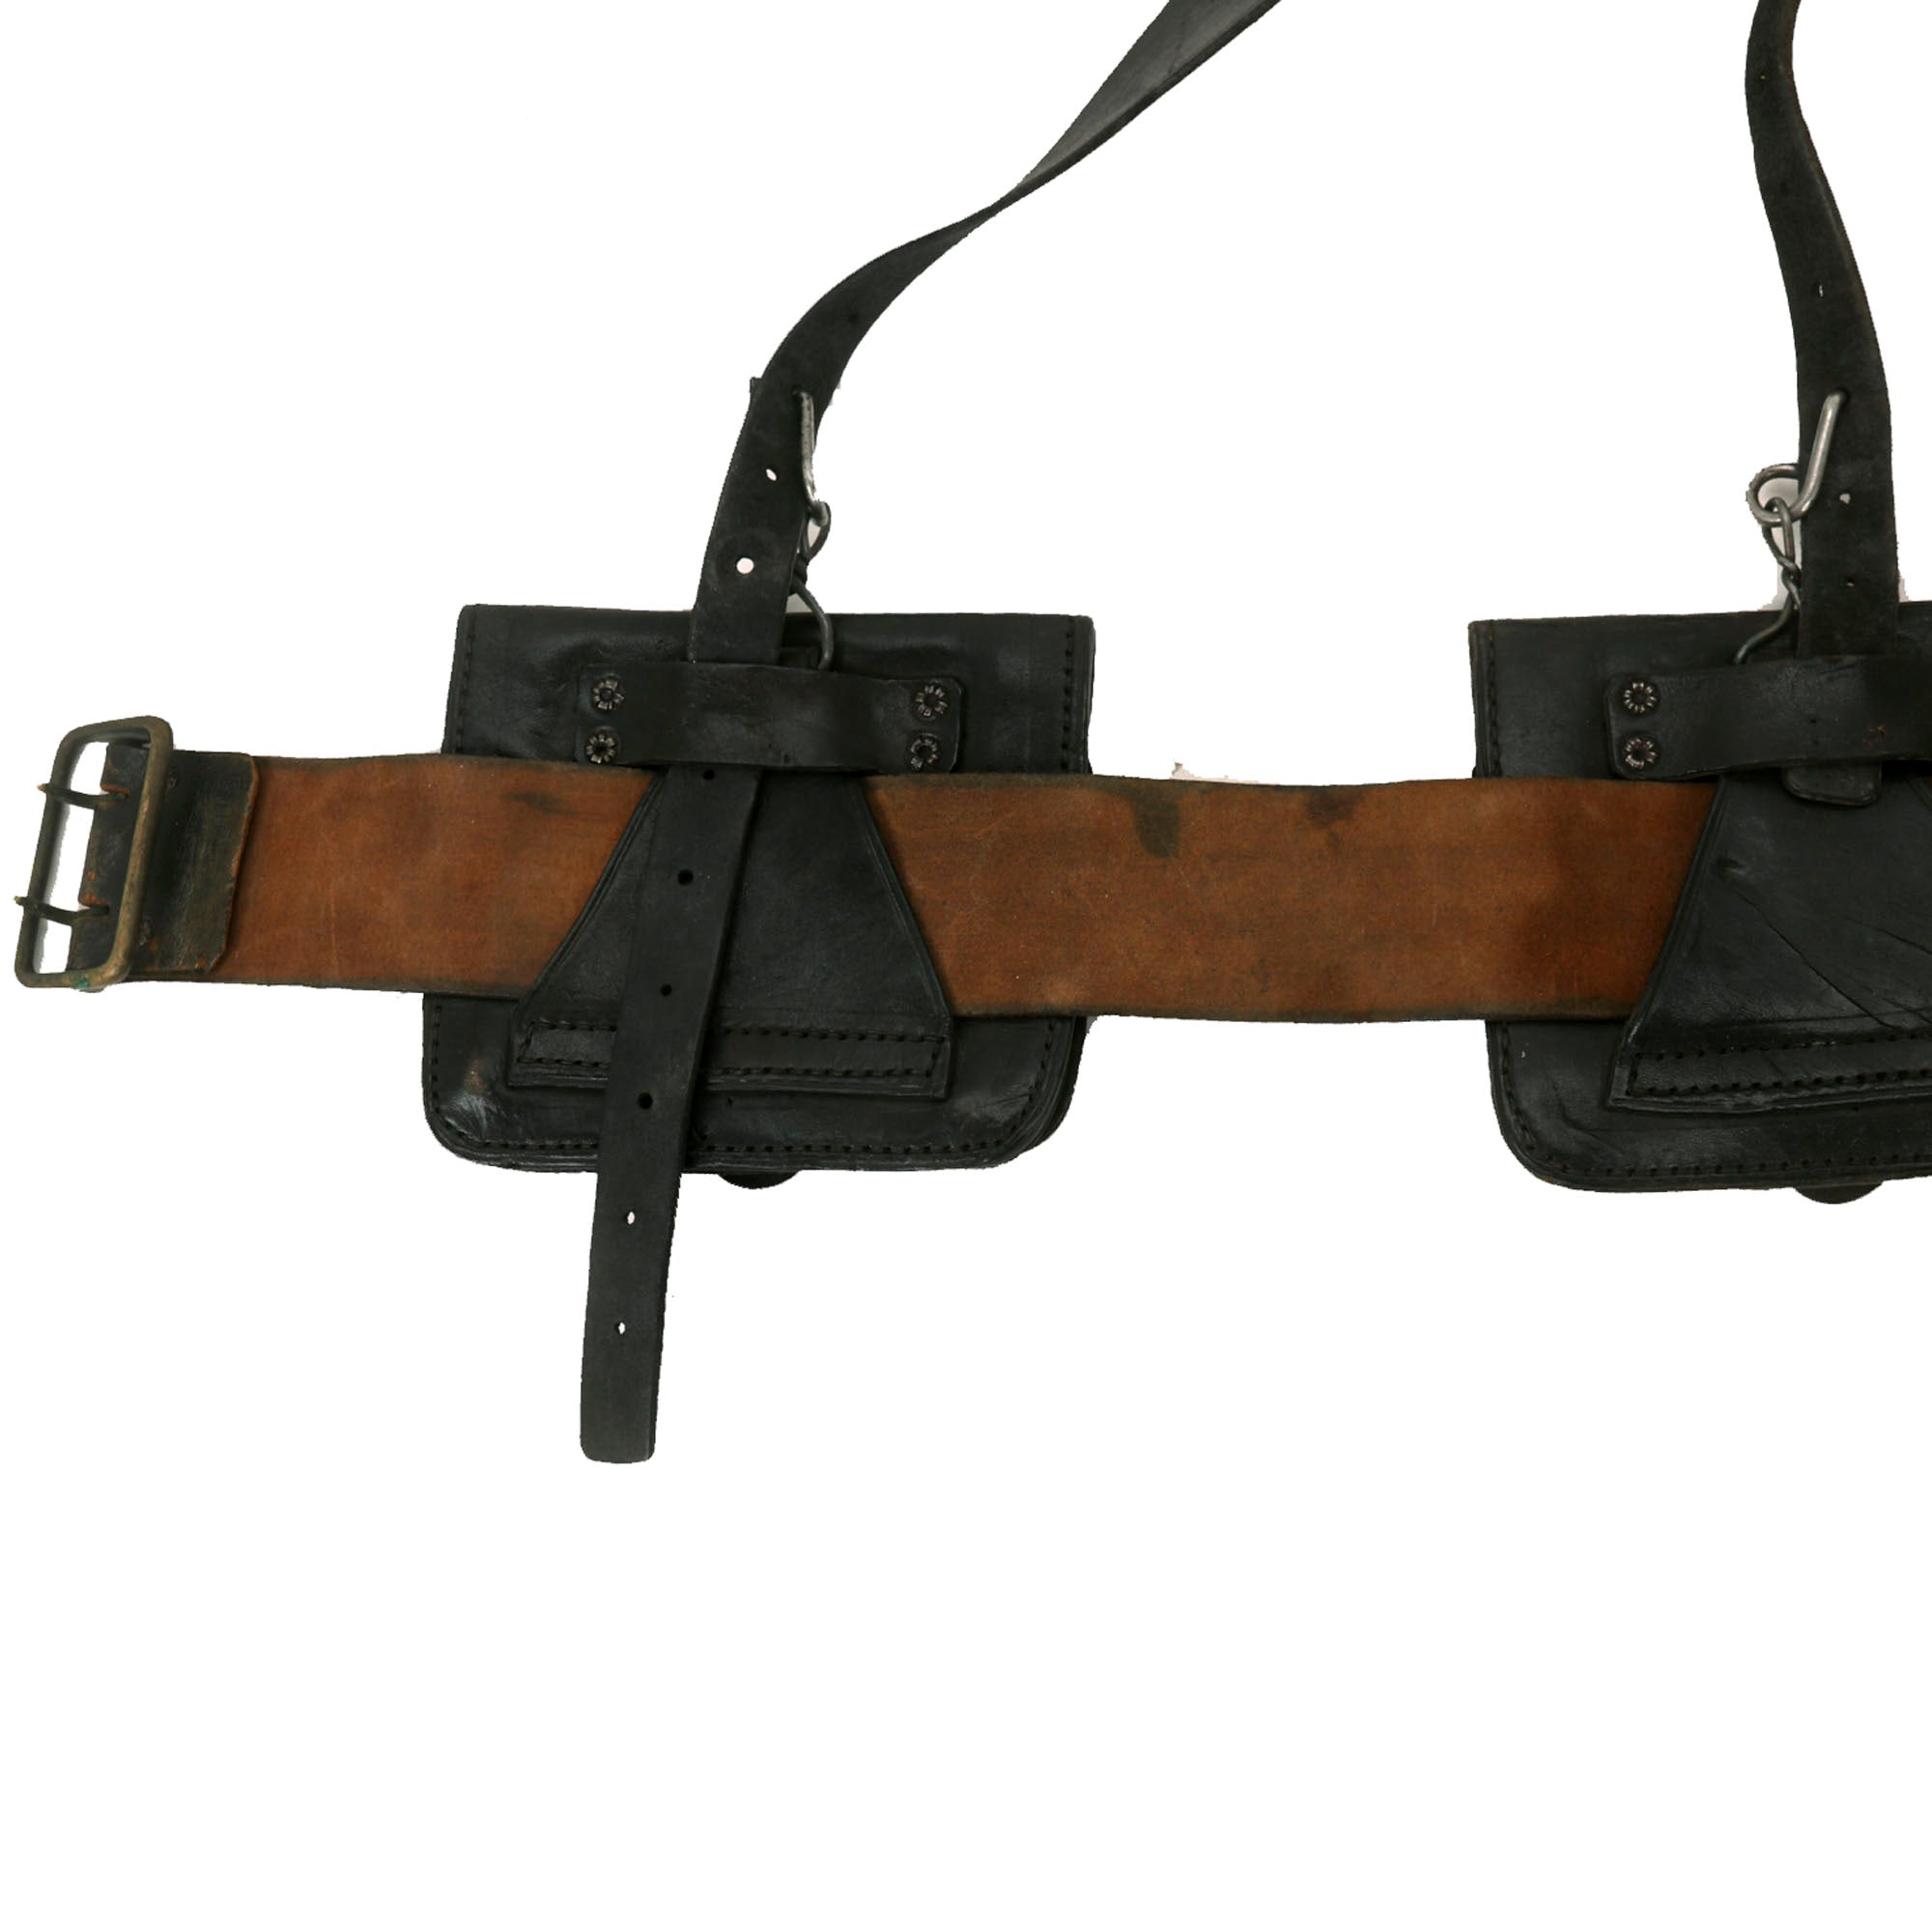 Mle. 1903/14 French Army belt - repro 90 cm 21,25 €